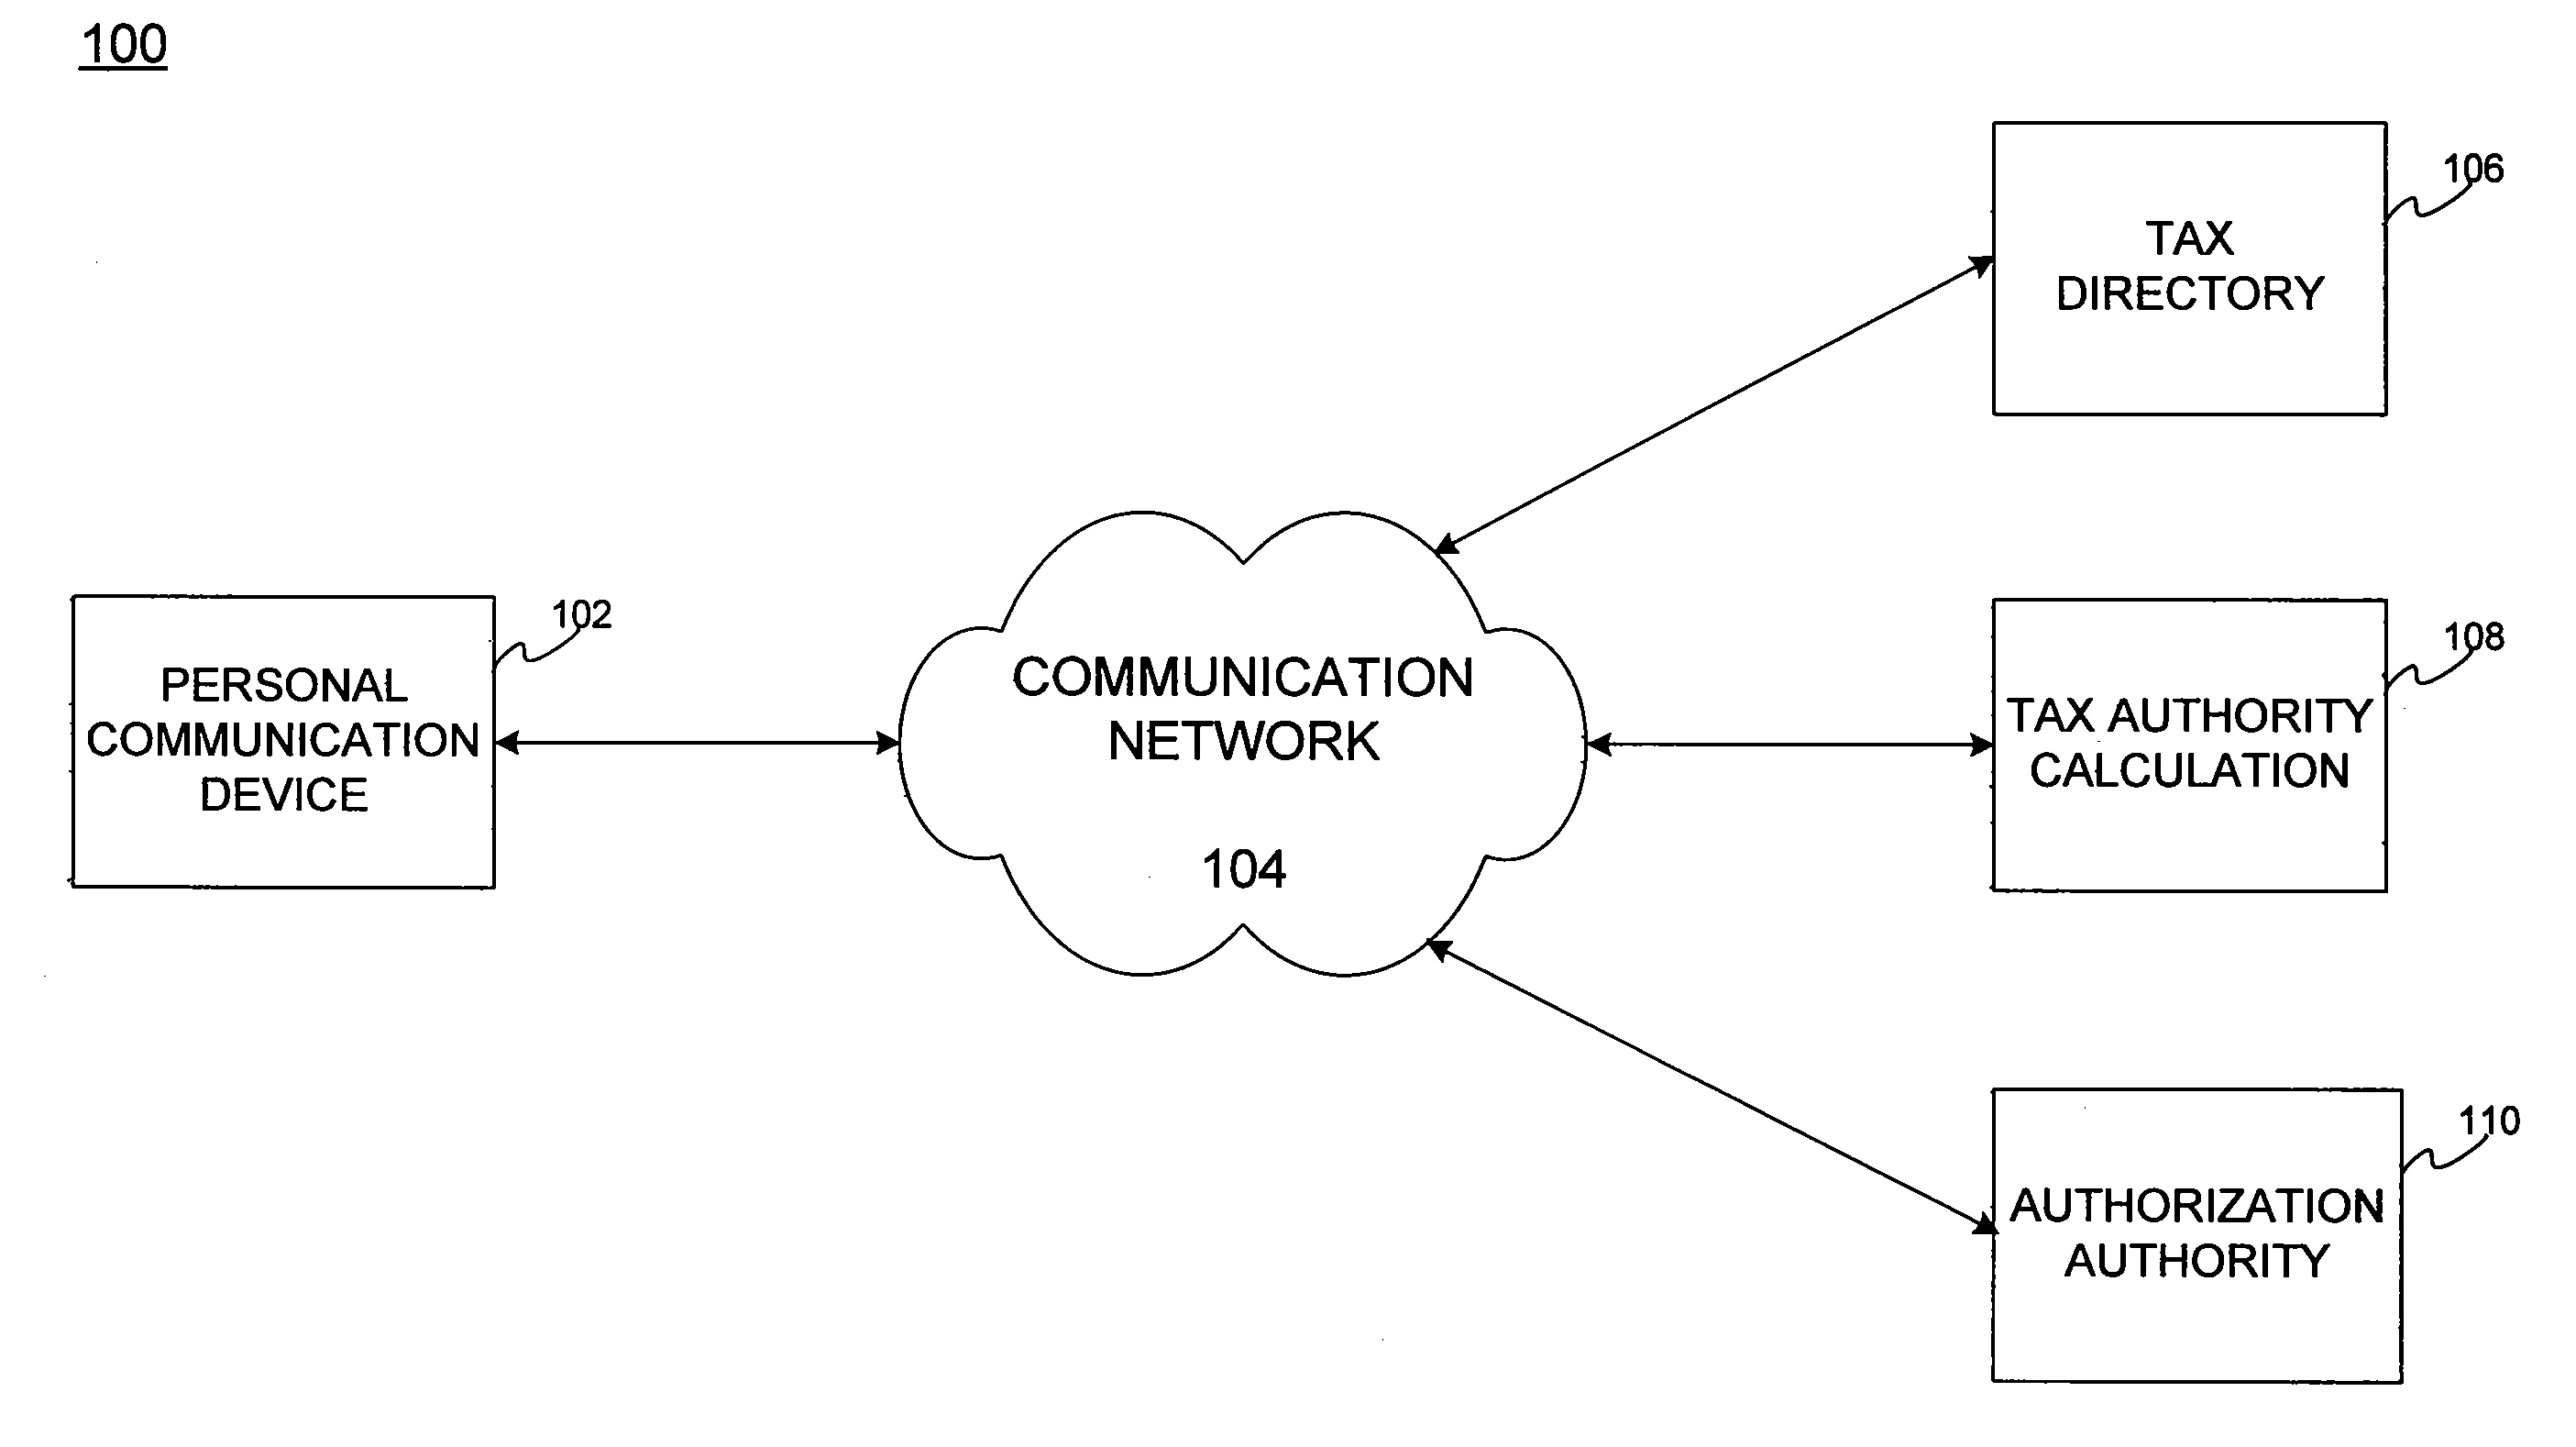 Transactional tax settlement in personal communication devices